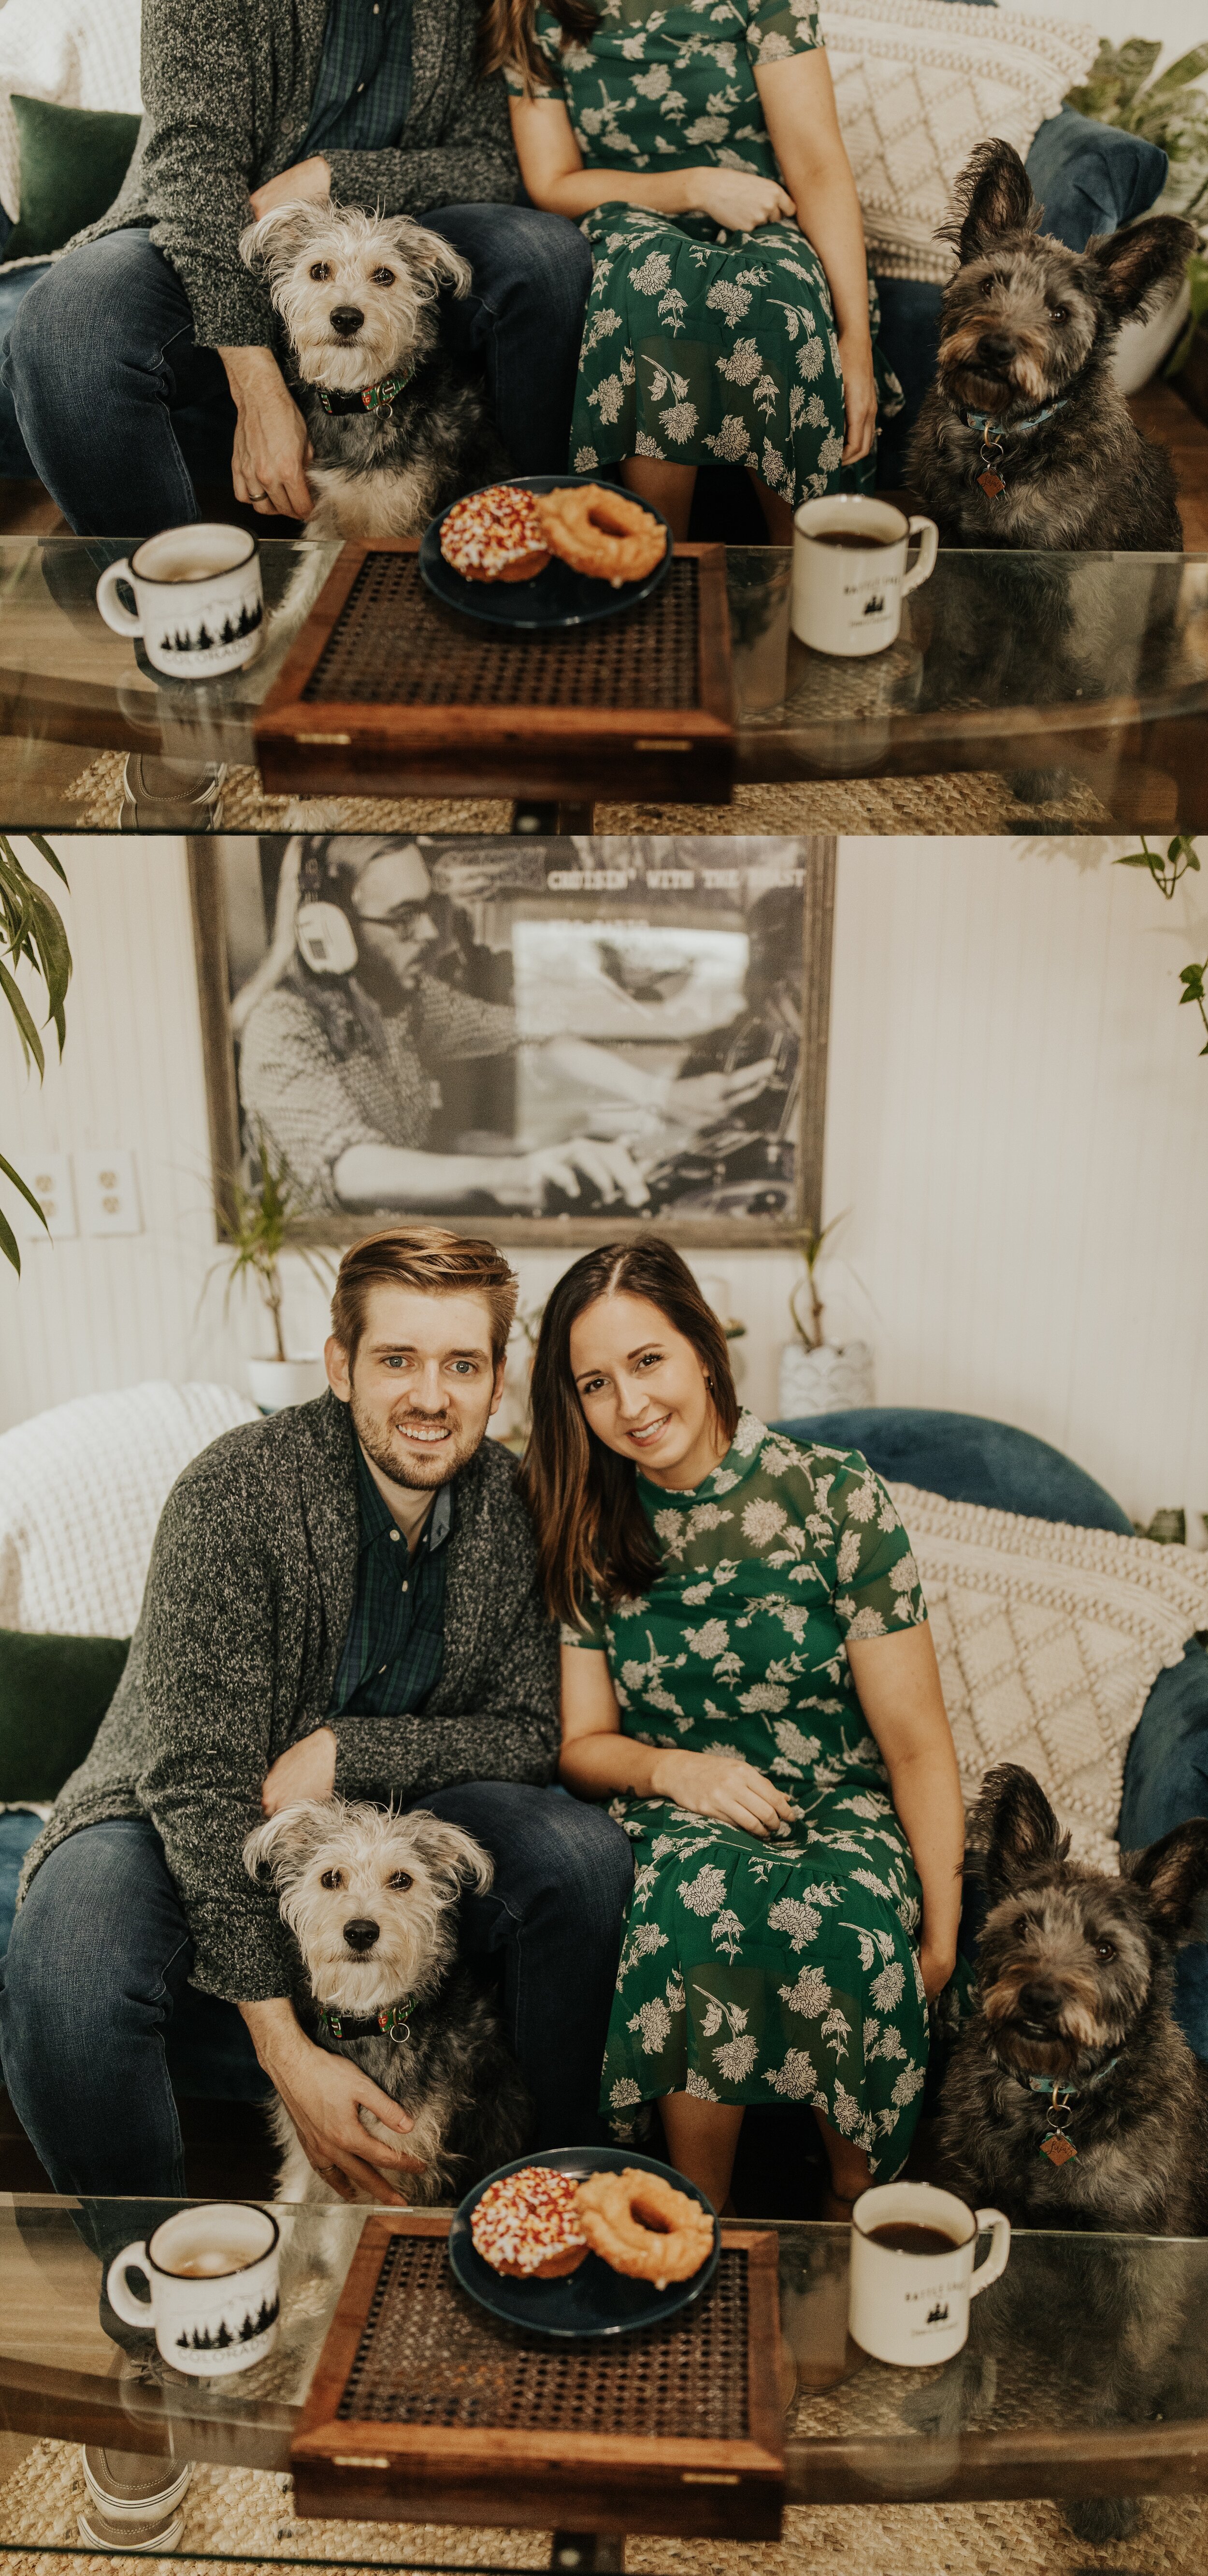 jessika-christine-photography-in+home-engagement-couples-cozy-adventurous-session (8).jpg